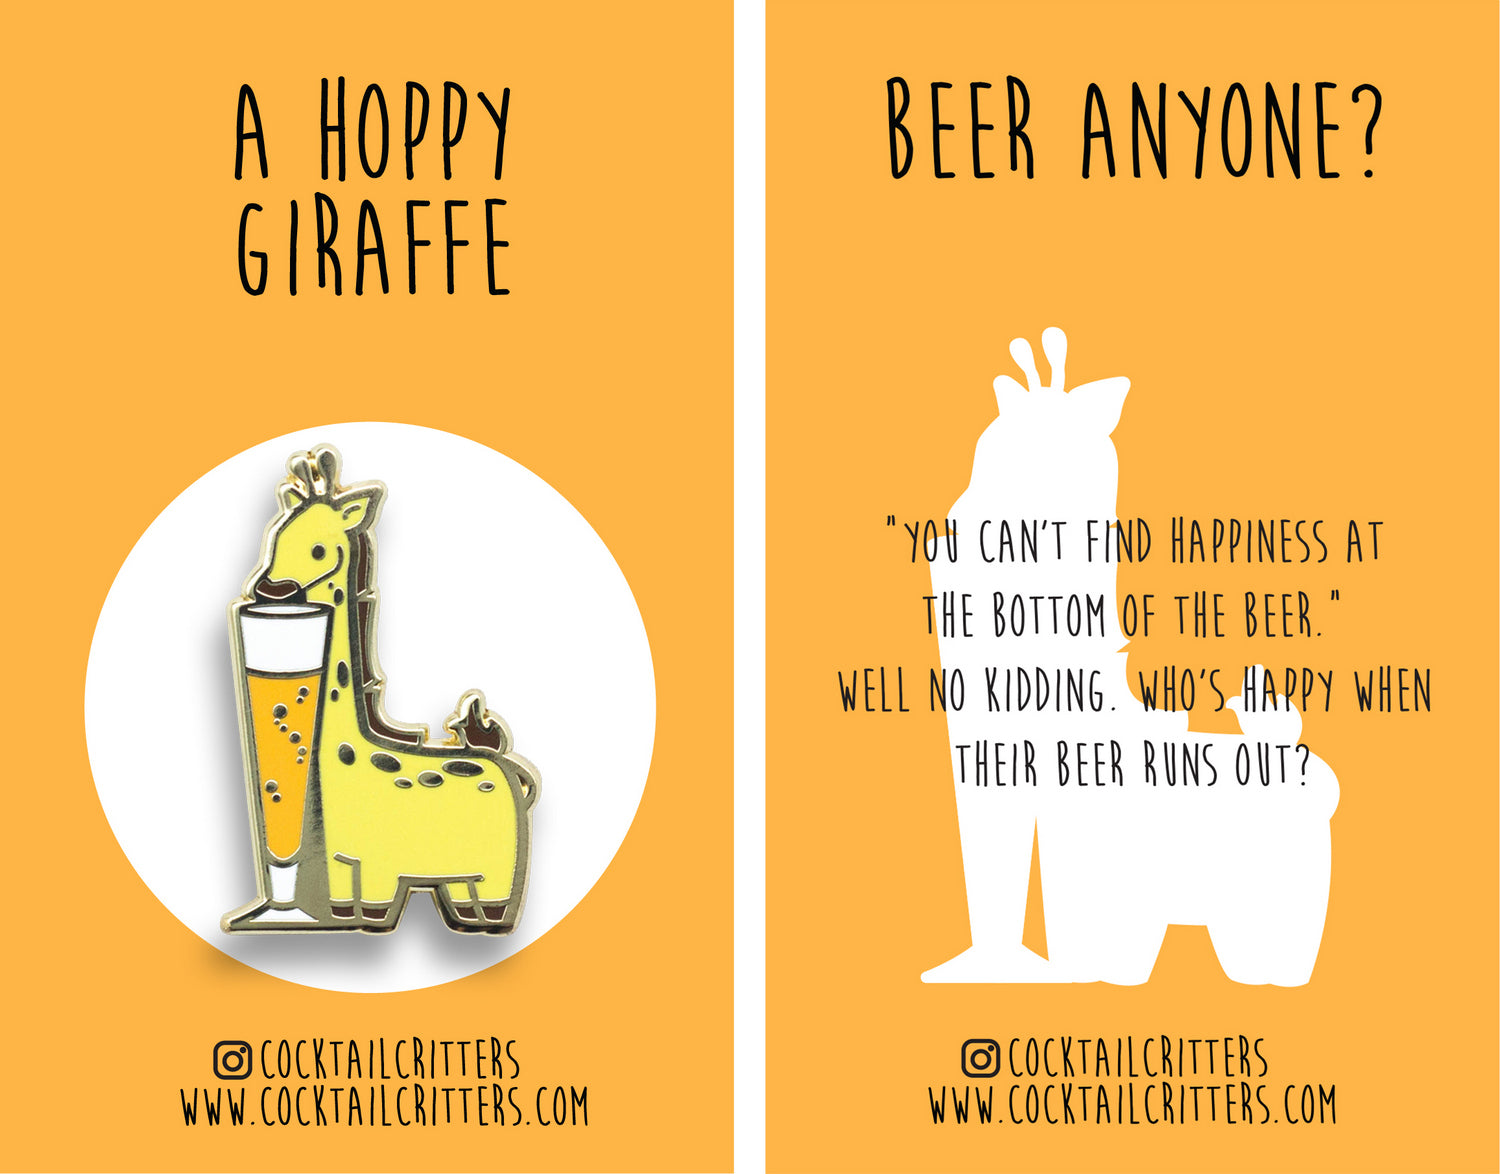 Giraffe and Lager Beer Hard Enamel Pin by Cocktail Critters